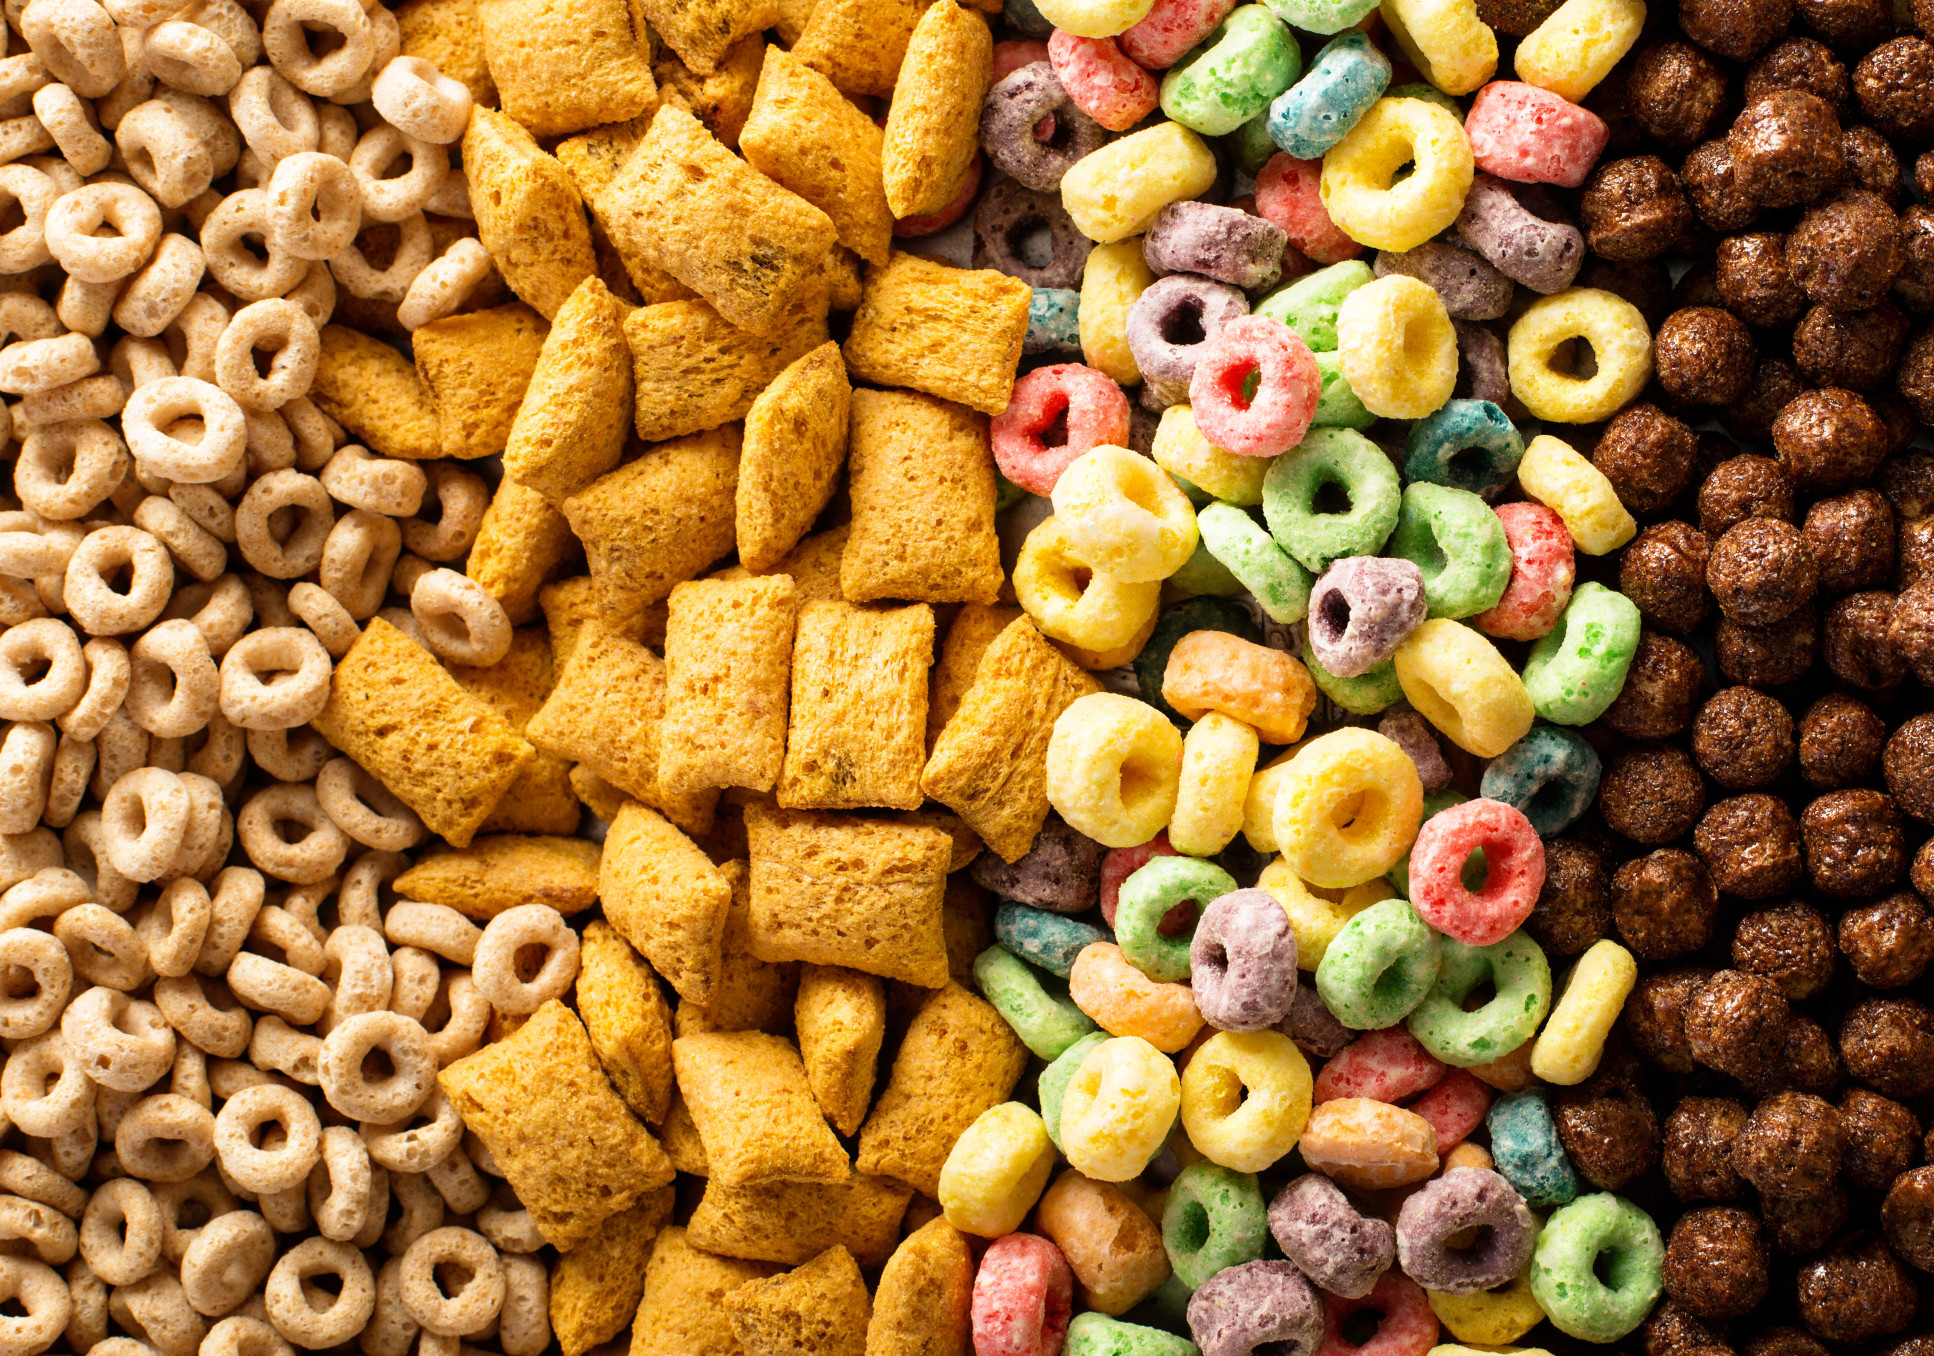 Image of four types of breakfast cereal.